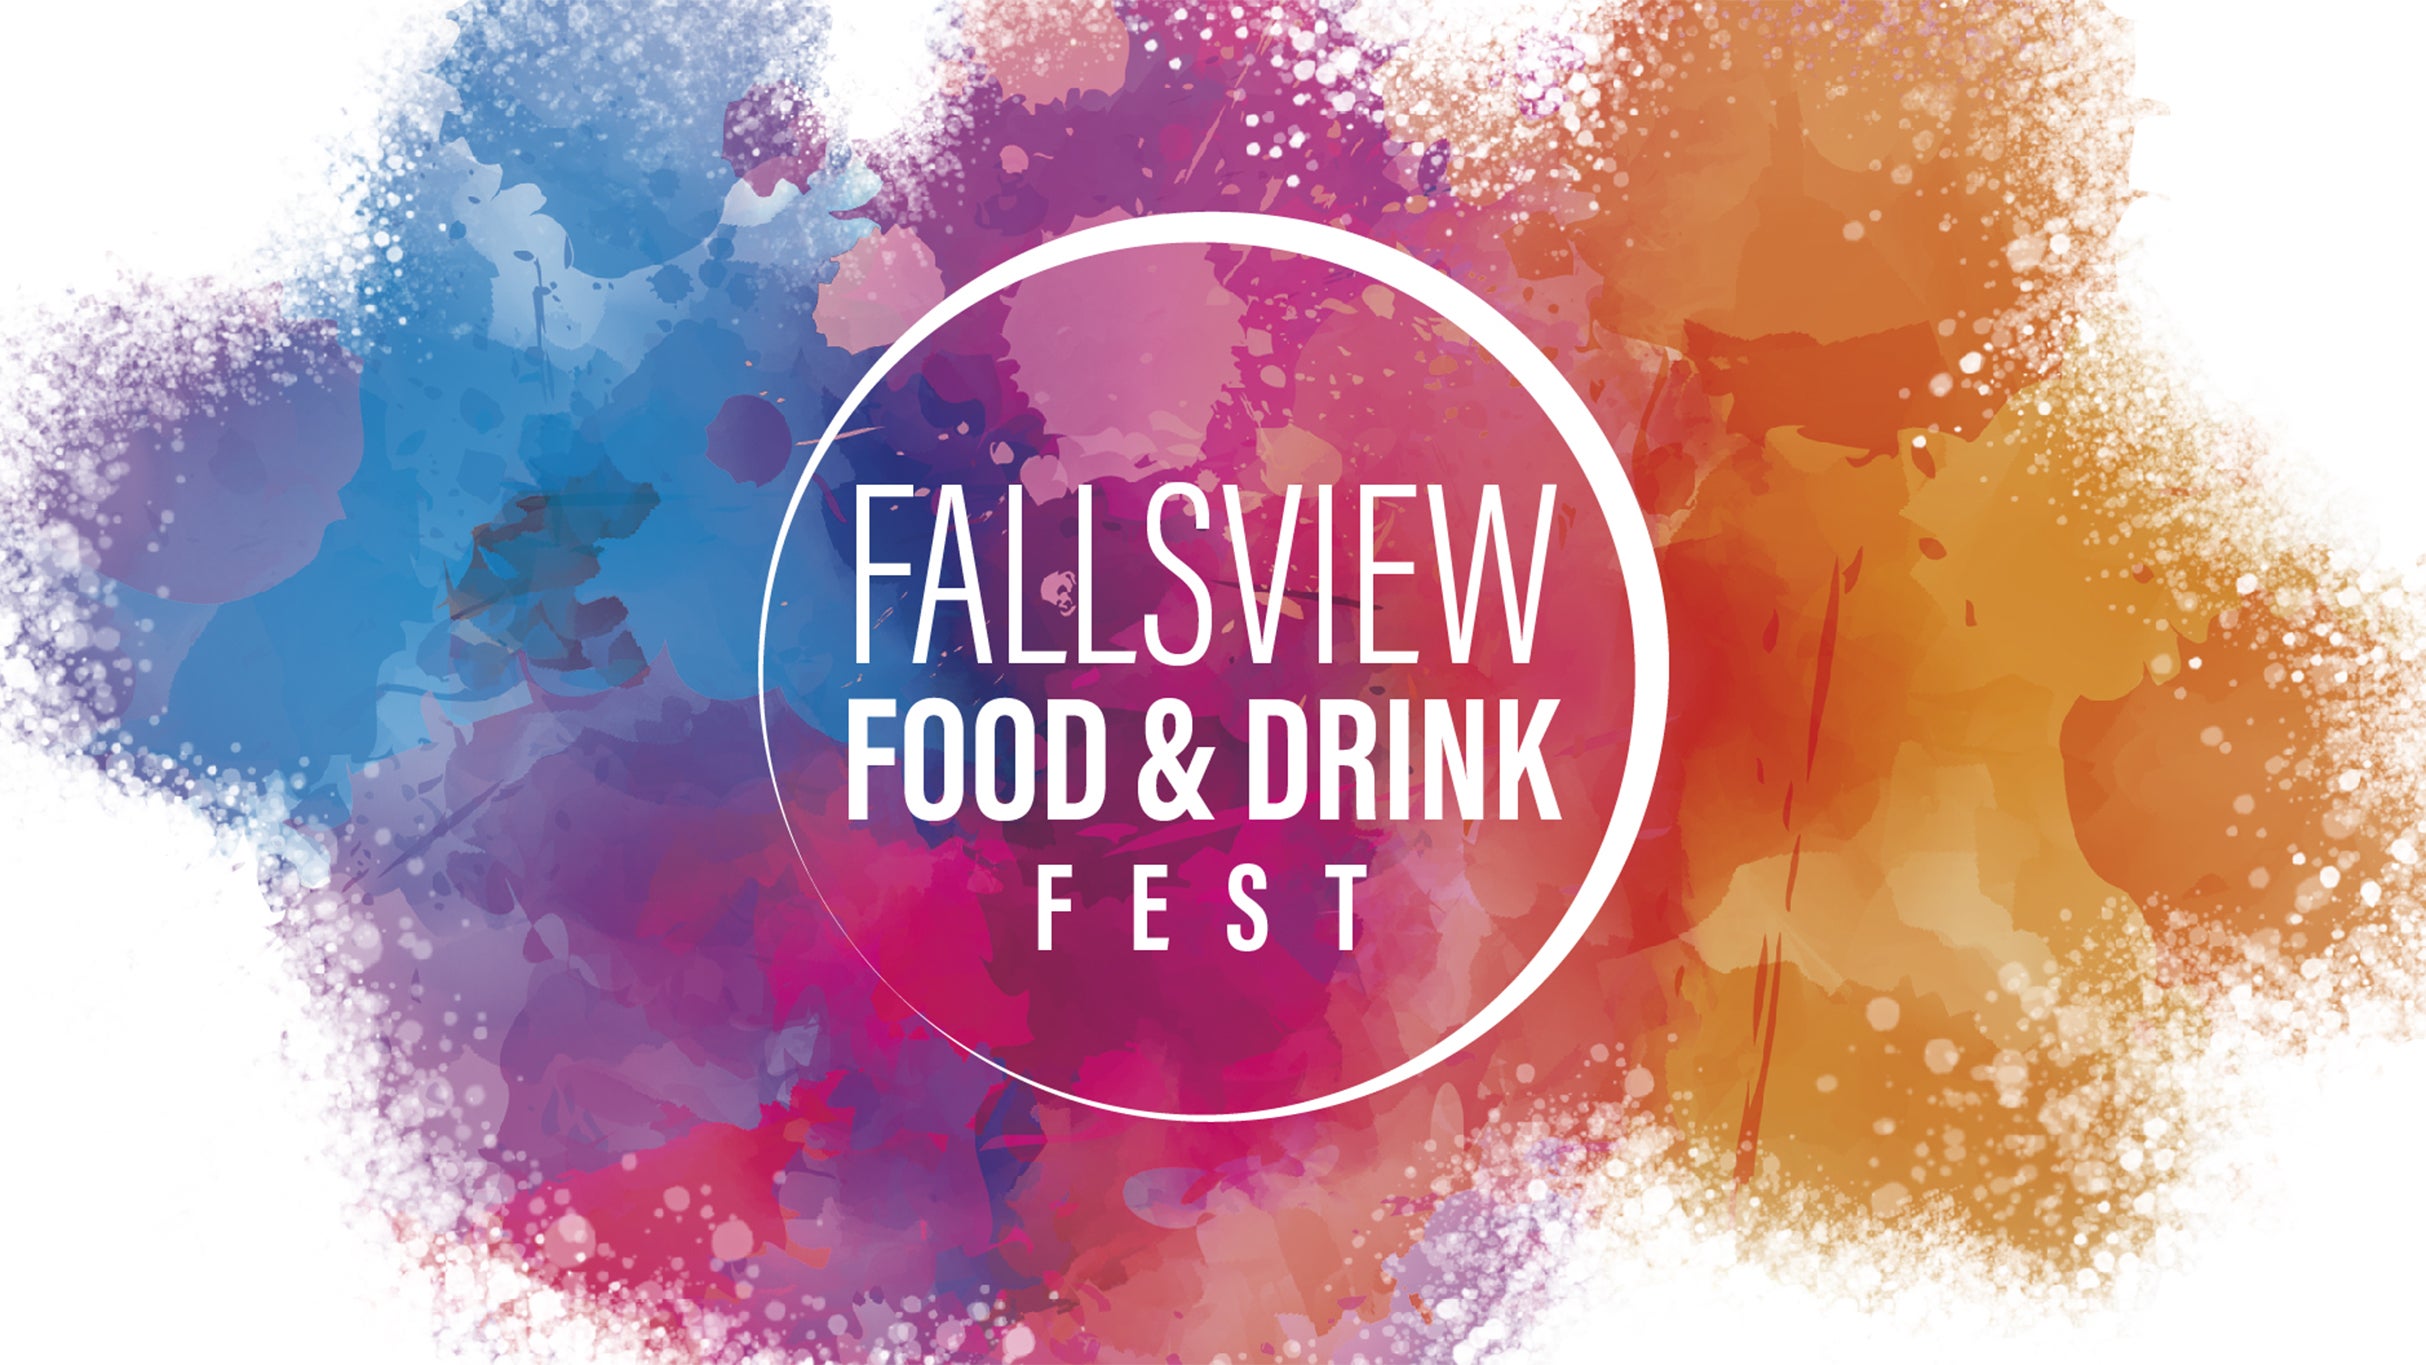 Fallsview Food & Drink Fest - Celebrity Chef Dine About presale code